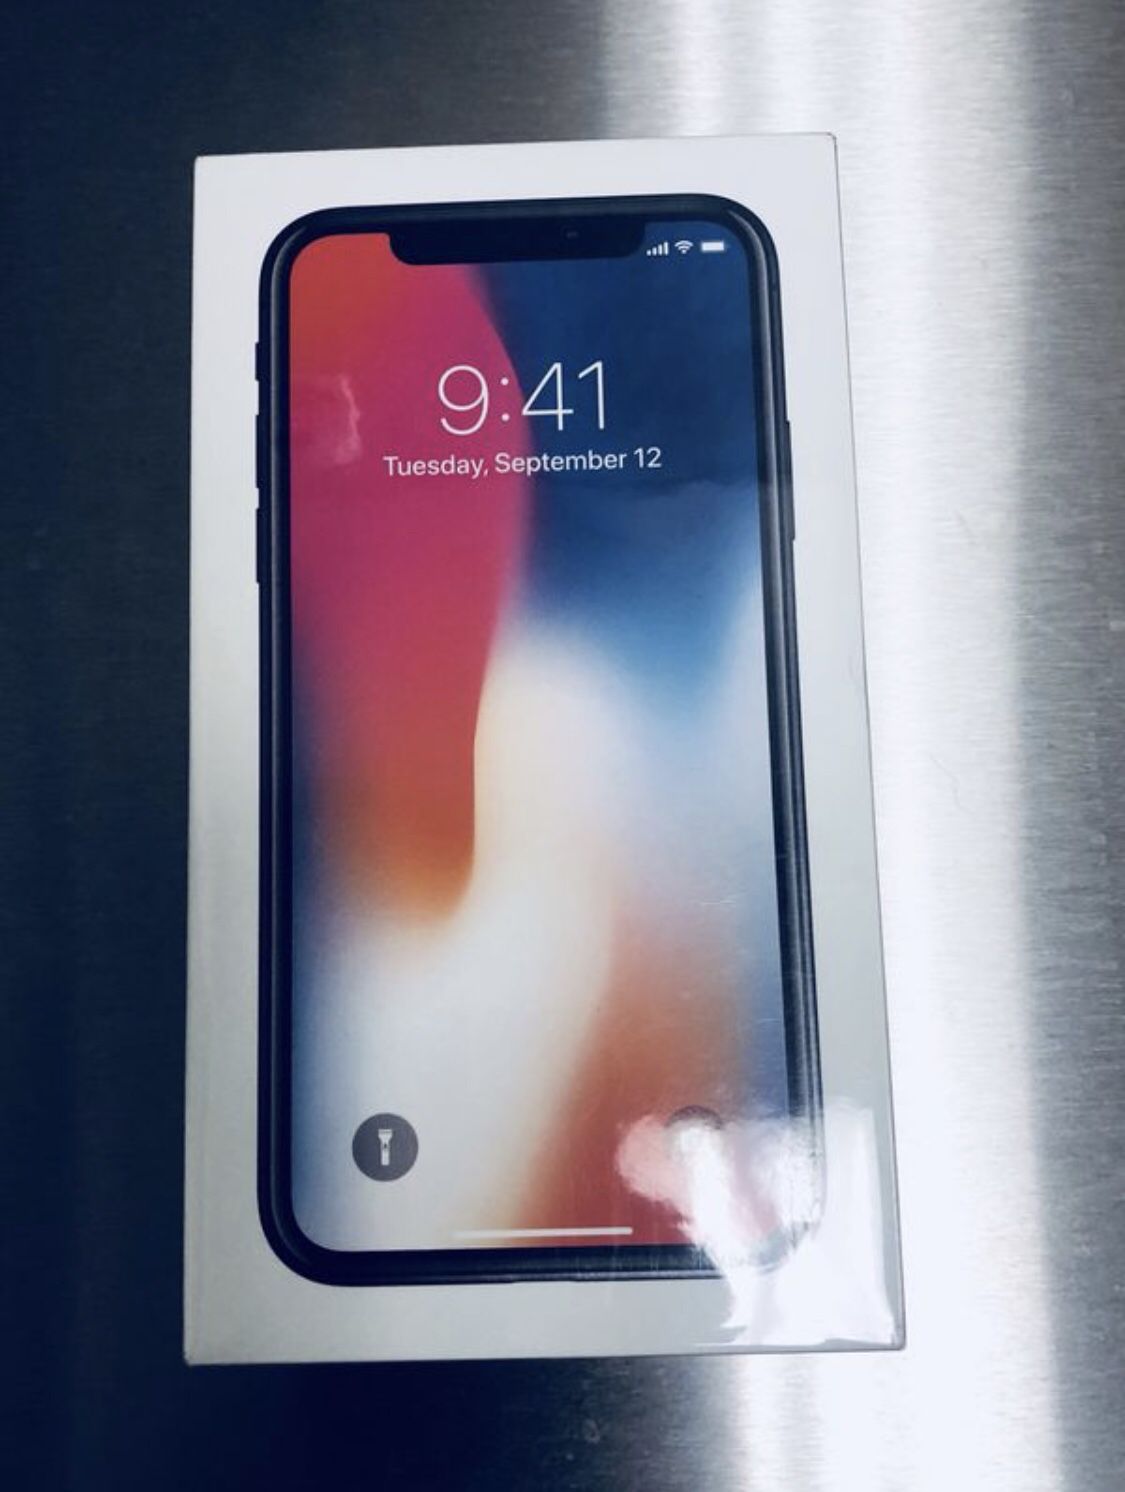 iPhone X 256GB Unlocked Space Gray Color